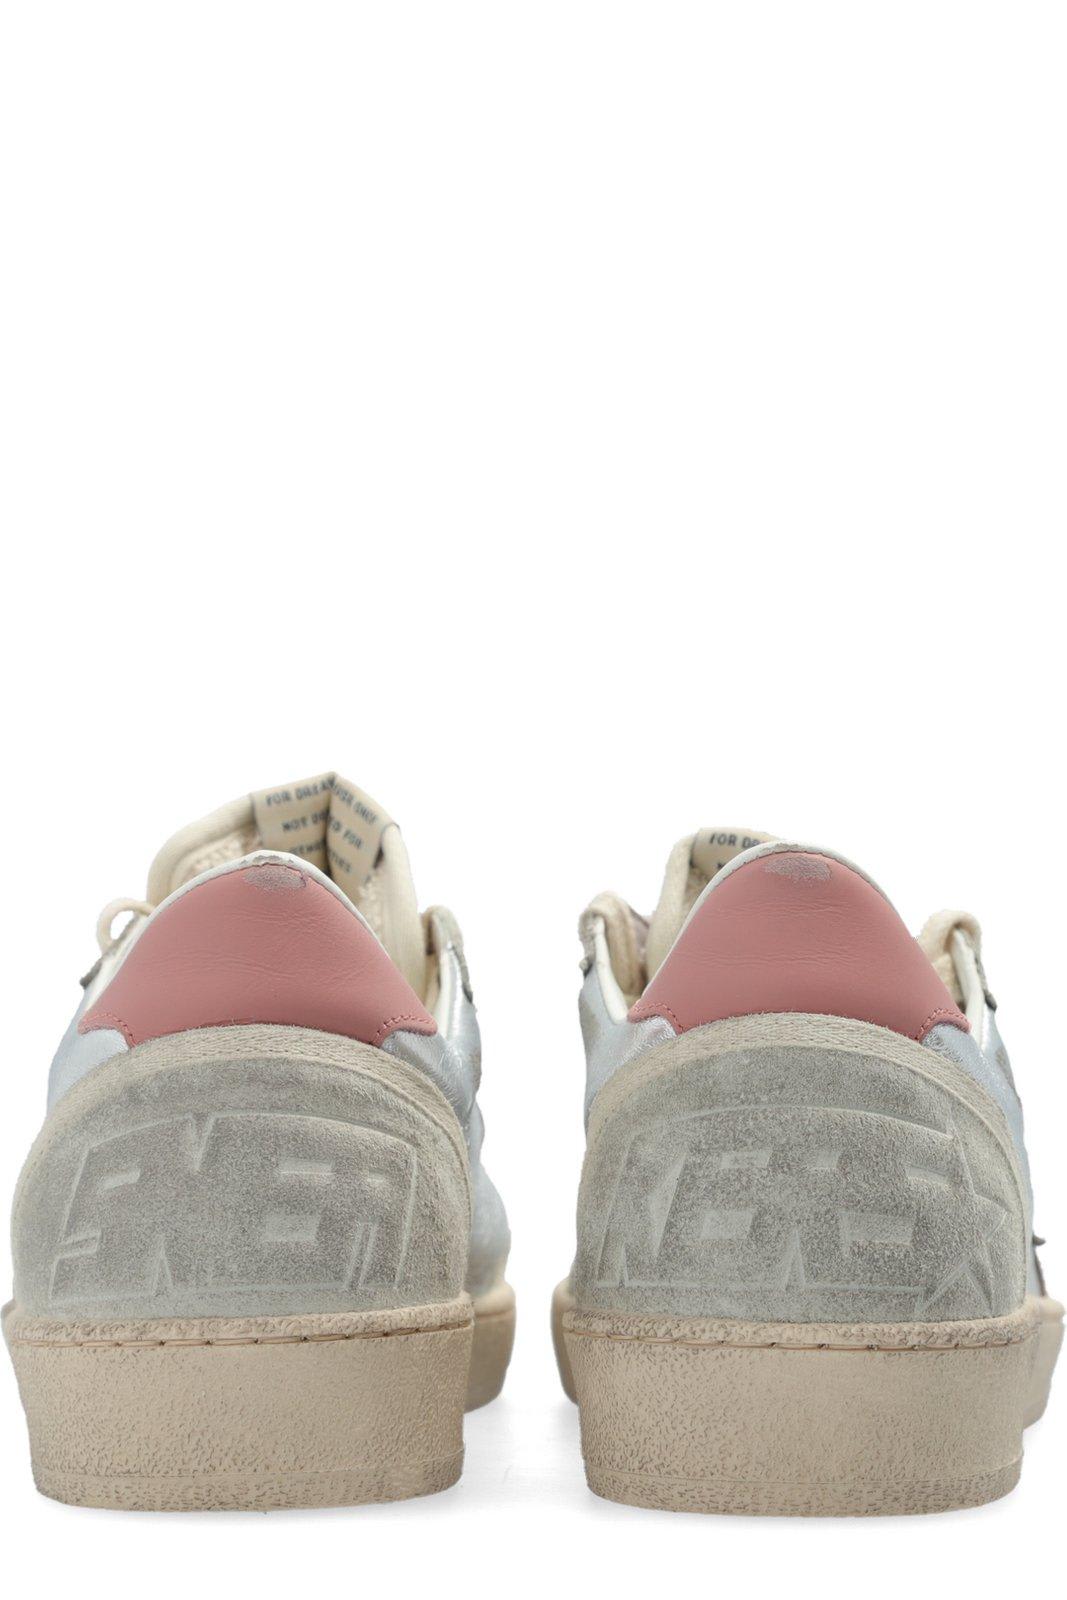 Shop Golden Goose Ballstar Metallic Lace-up Sneakers In Silver/ash Rose/ice